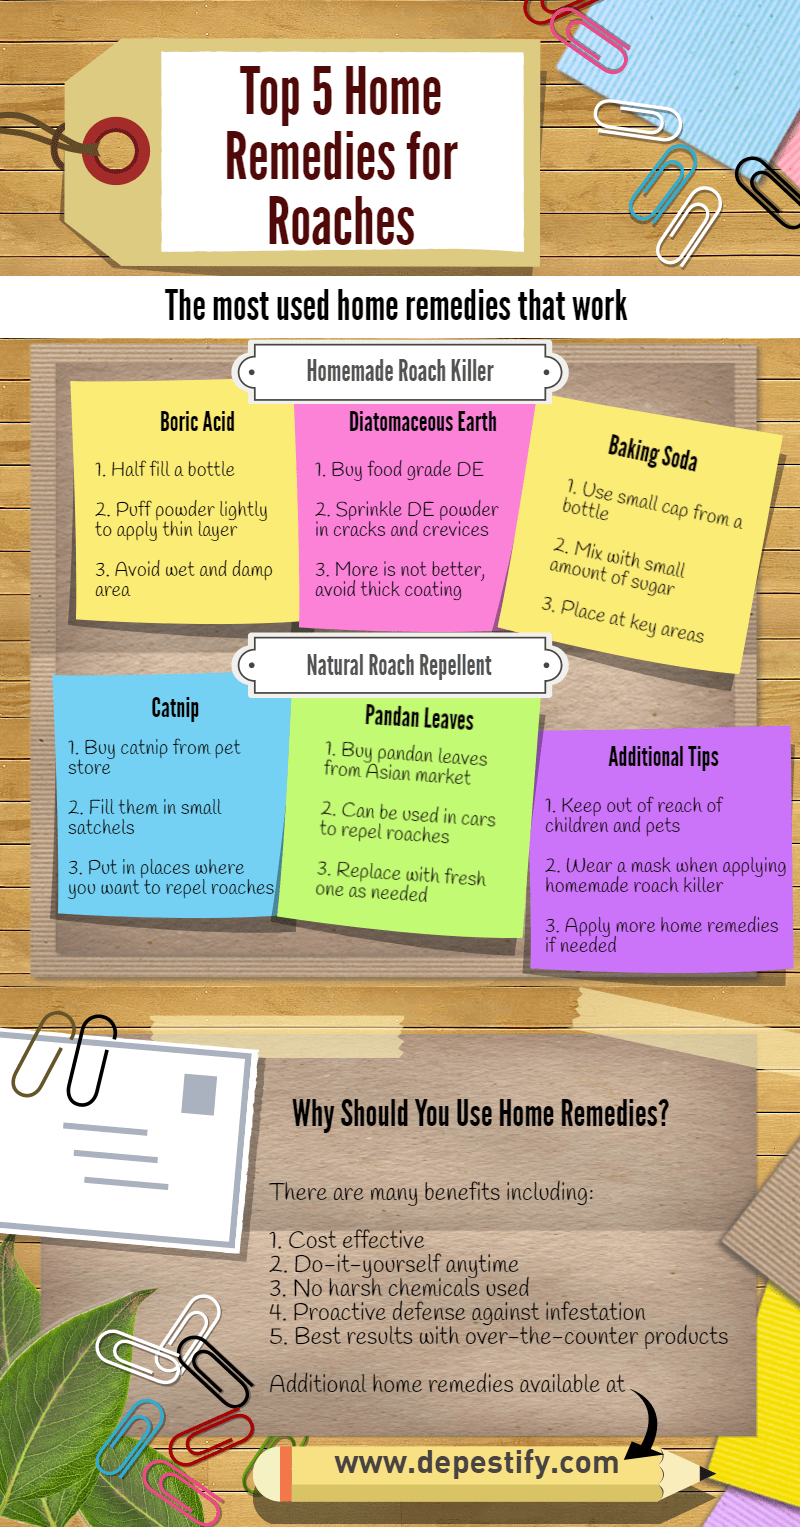 Home Remedies for Roaches Infographic